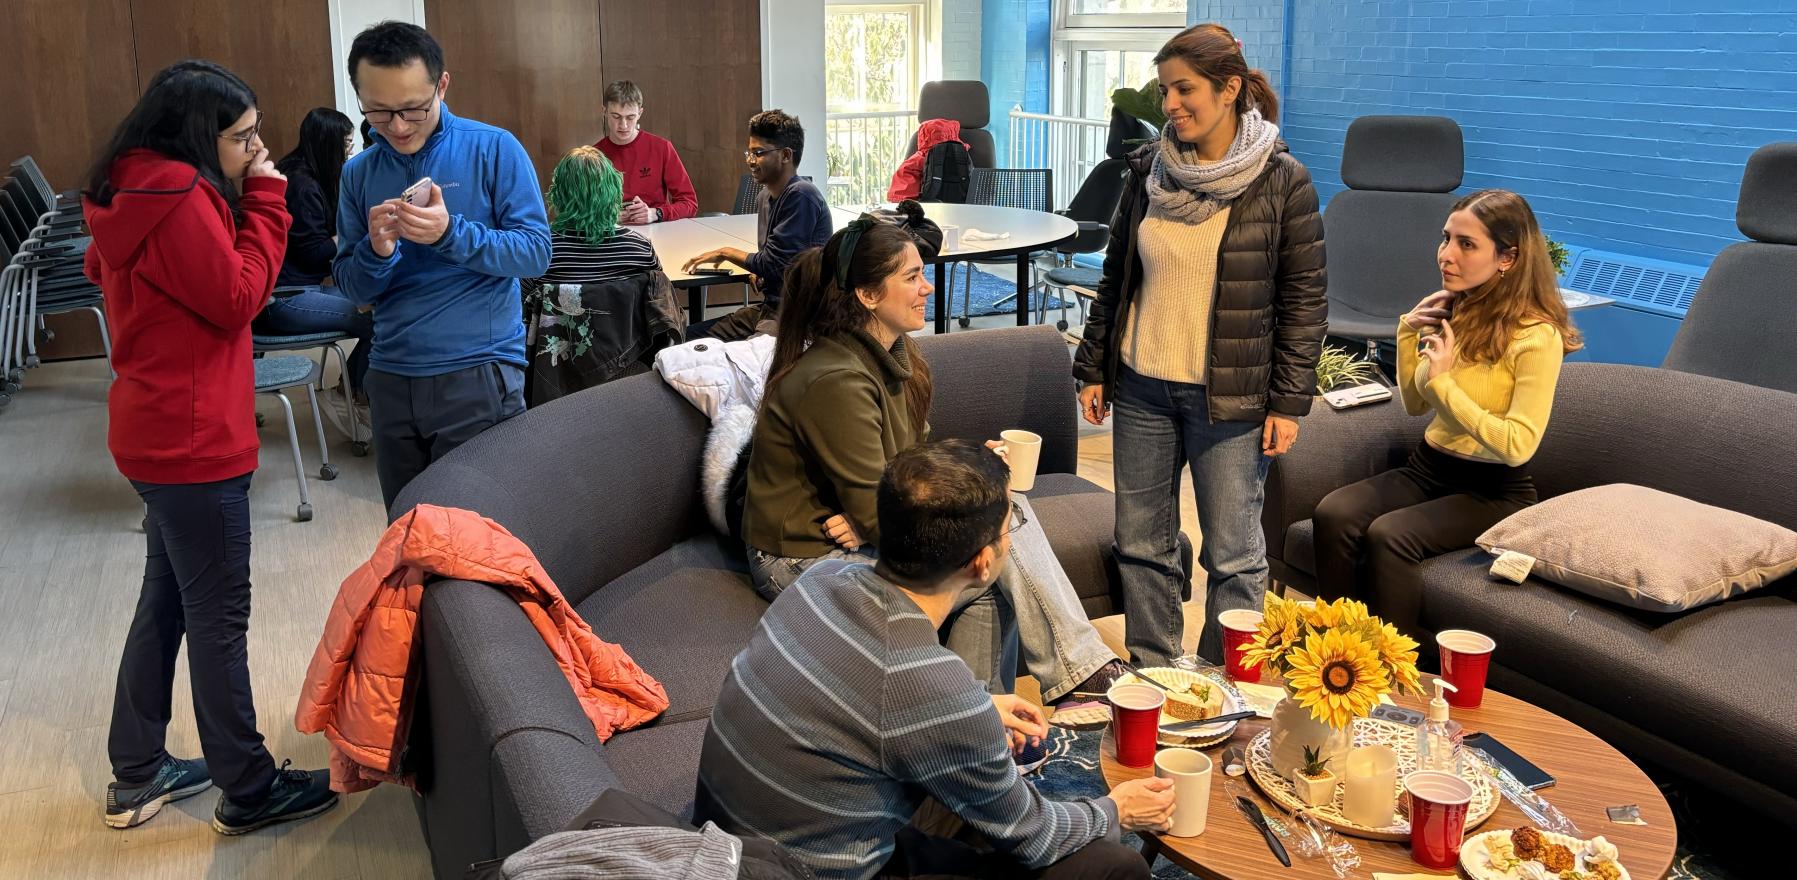 Several students in a lounge, speaking to each other and smiling